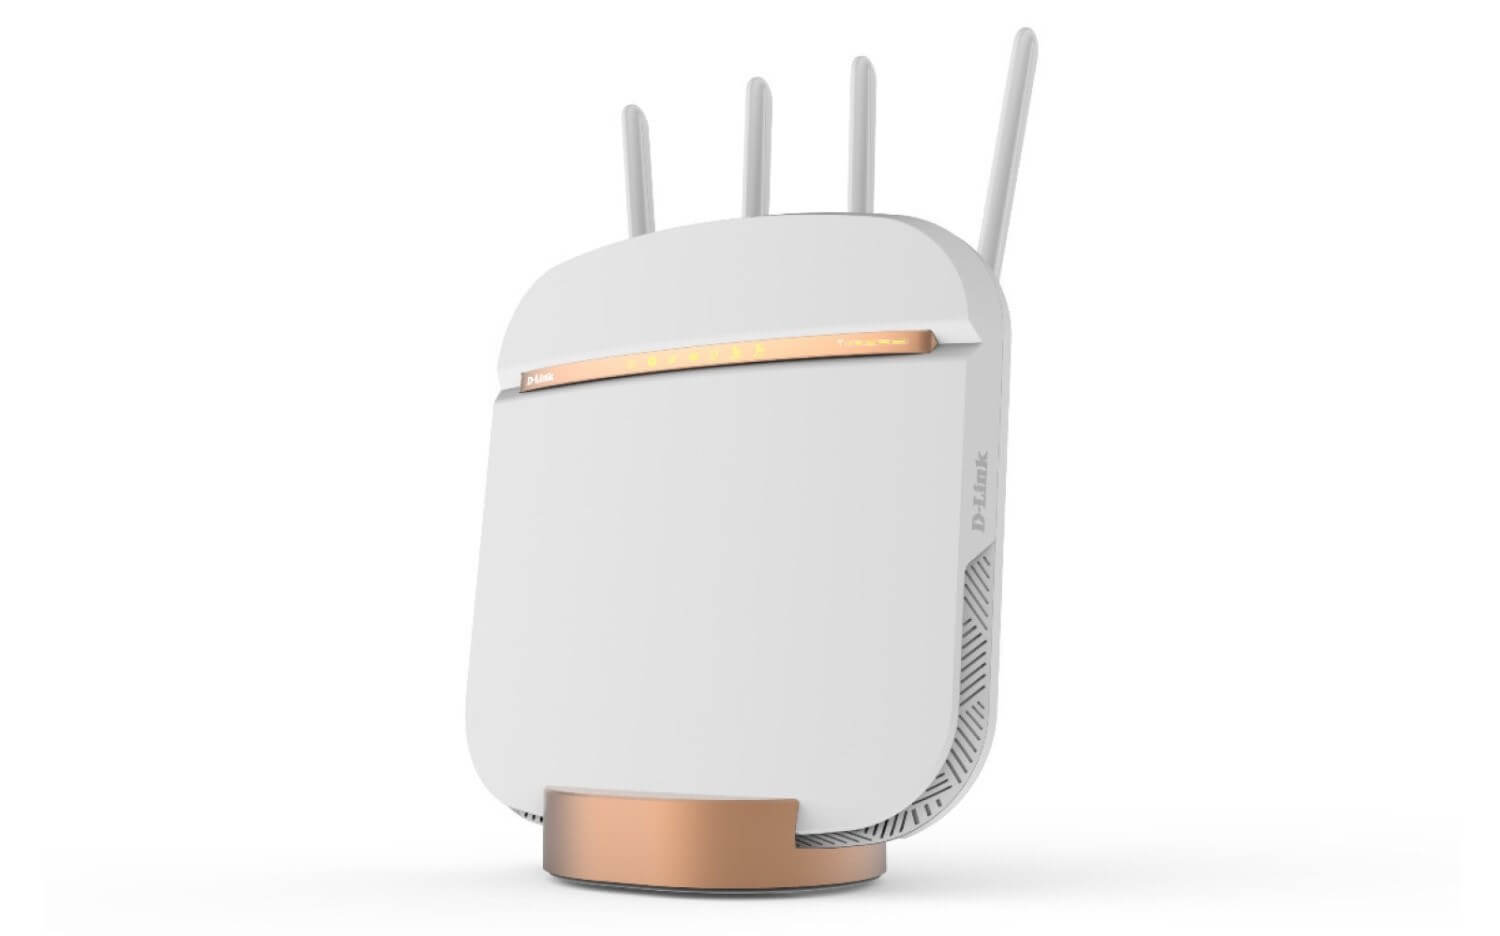 D-Link announces a 5G router that's 40 times faster than average broadband